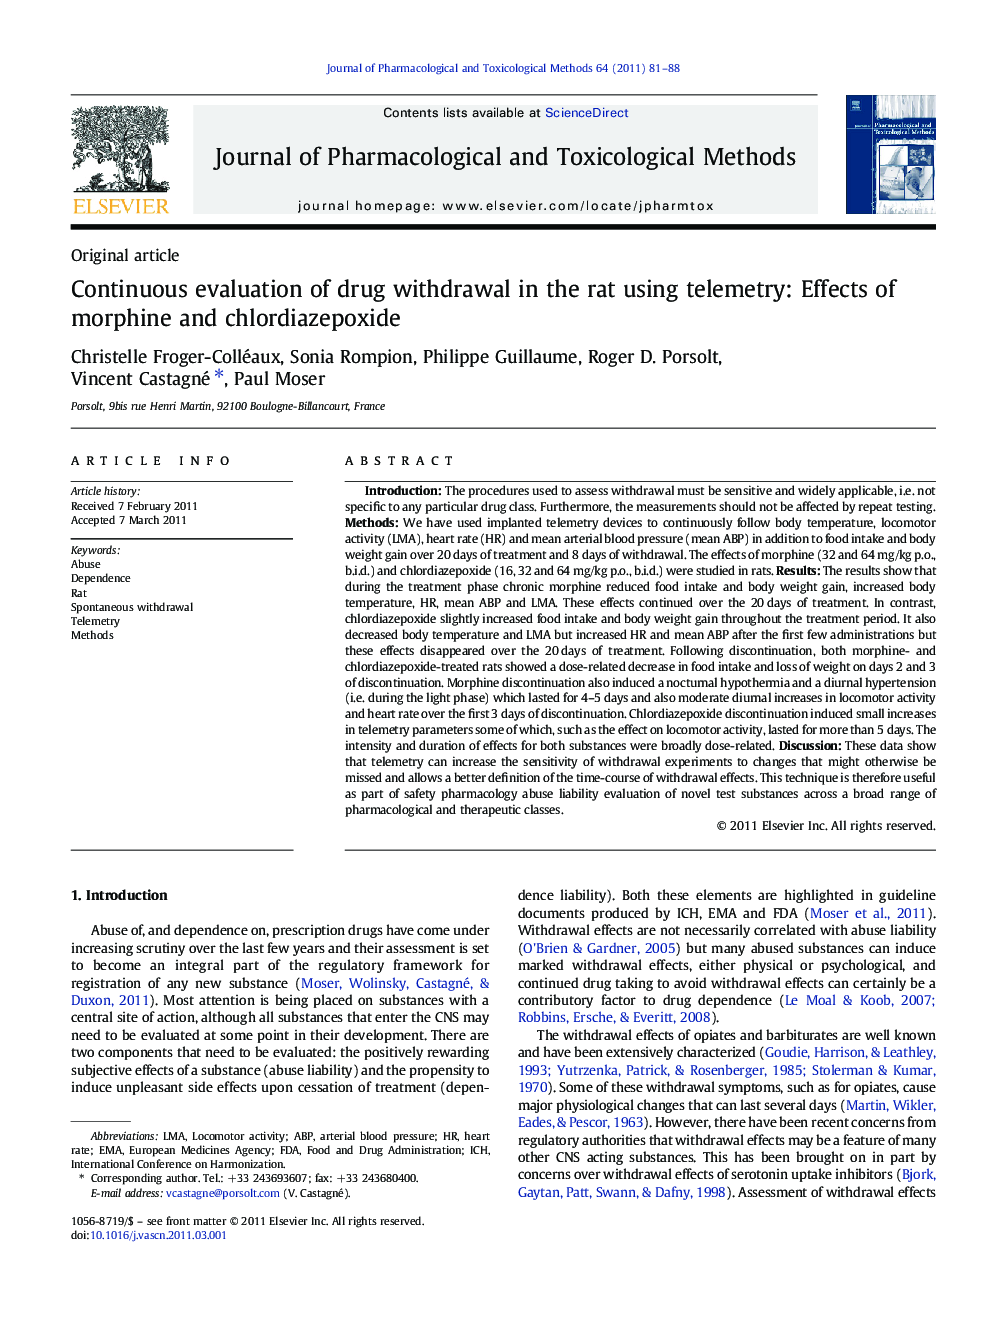 Continuous evaluation of drug withdrawal in the rat using telemetry: Effects of morphine and chlordiazepoxide